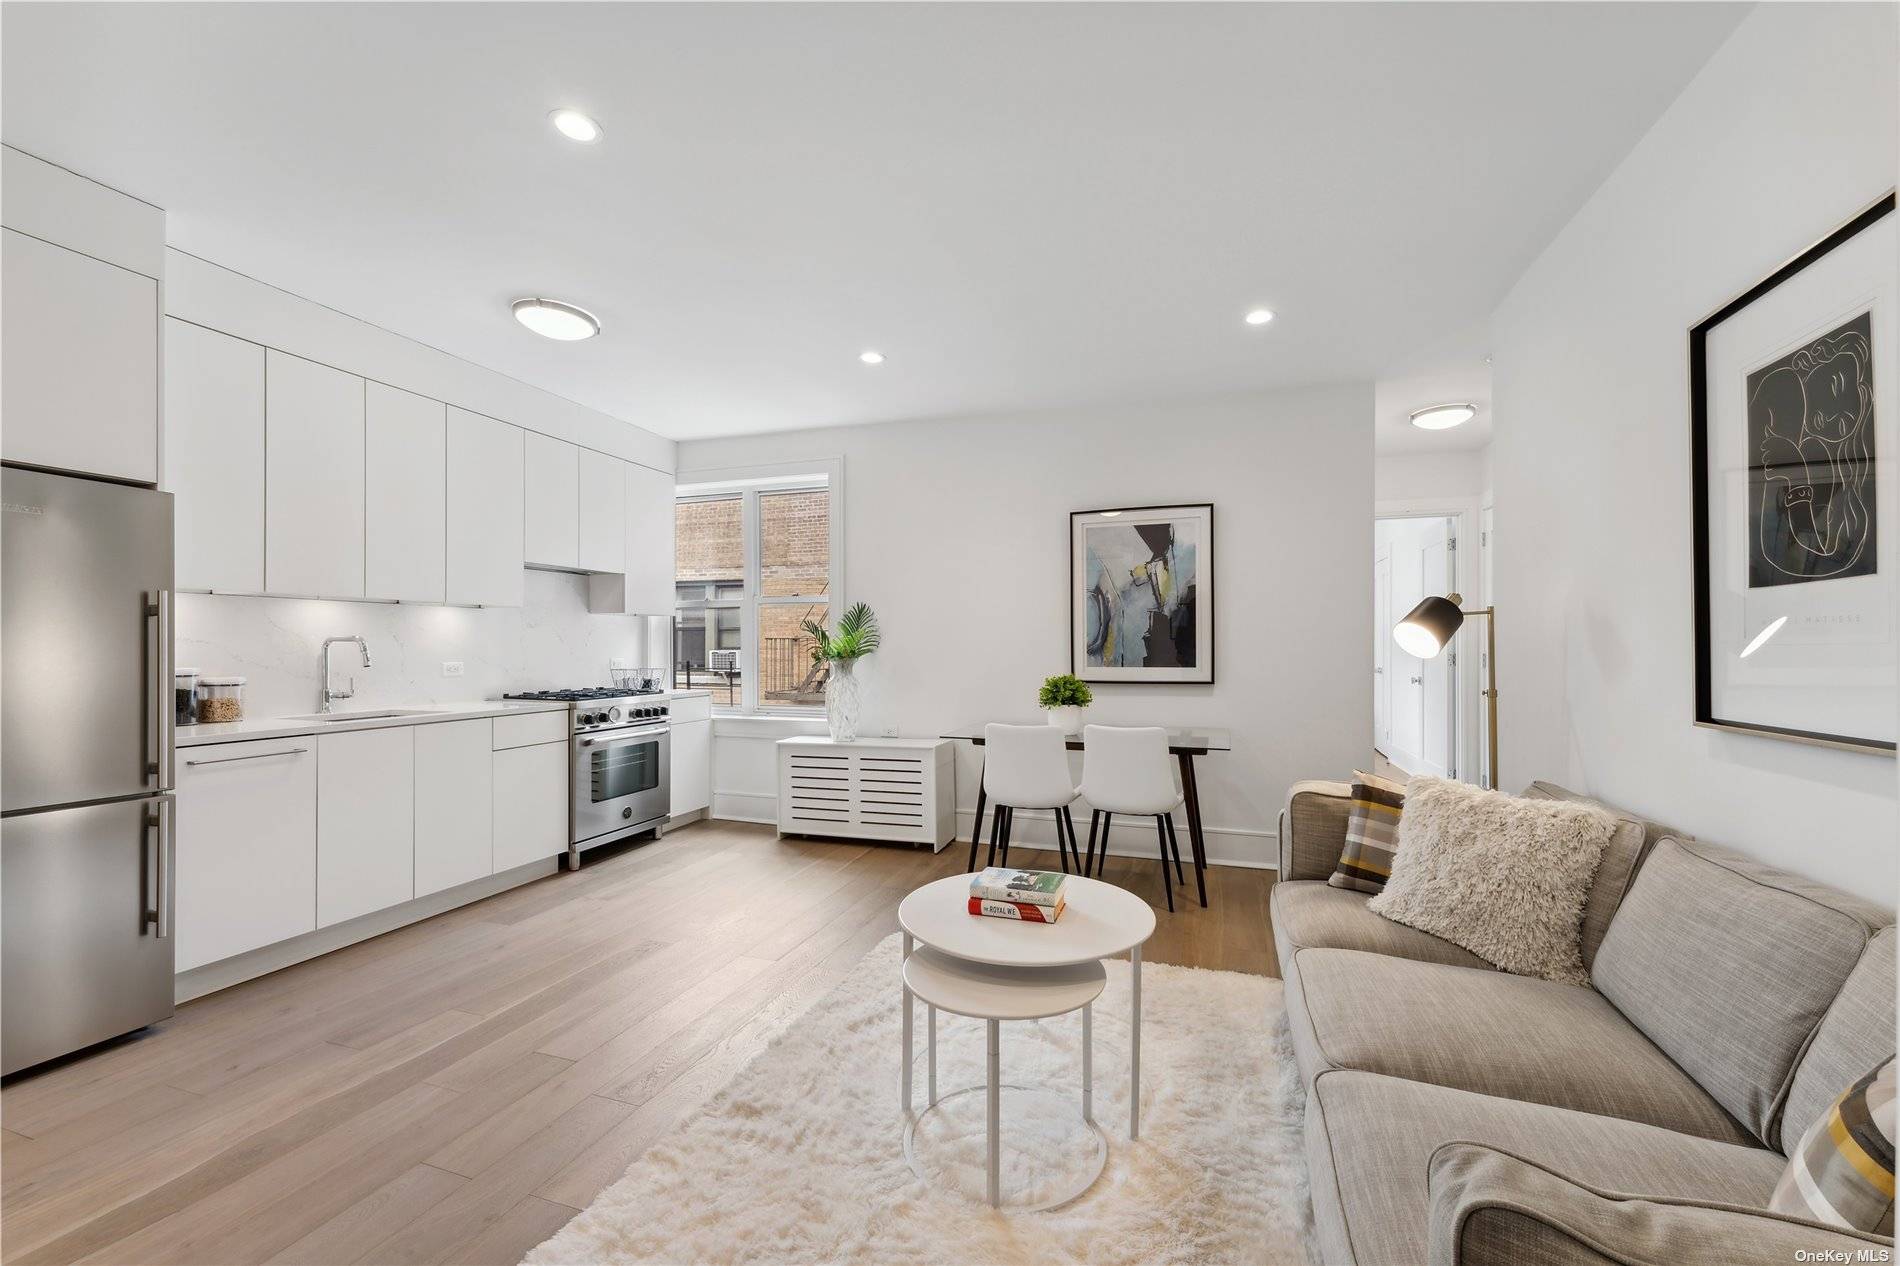 Welcome to Northern Lights A collection of newly released, brand new, renovated apartments in a re imagined pre war, converted condominium building located moments away from the heart of Downtown ...